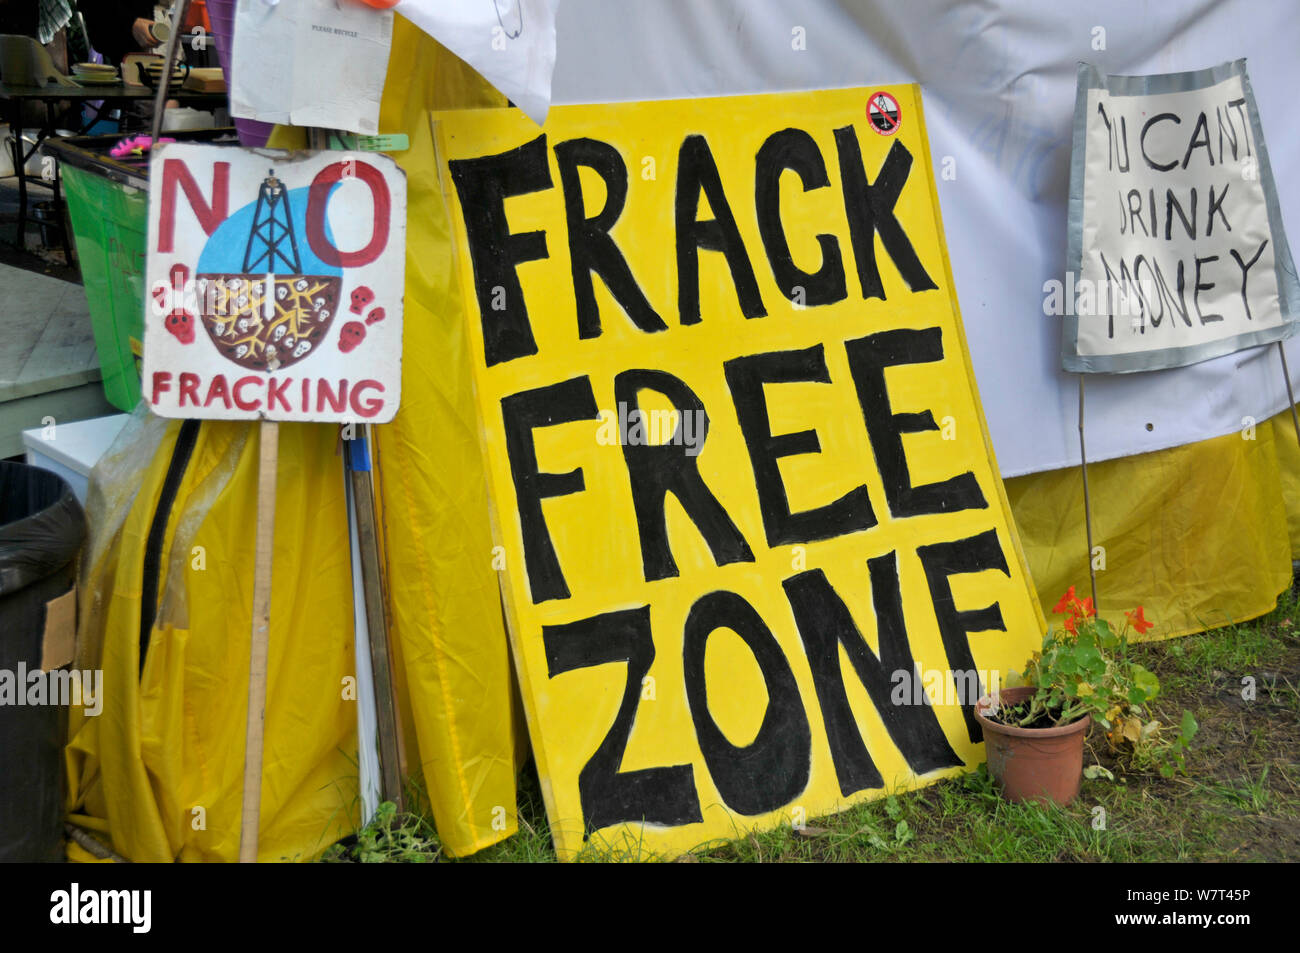 Anti-fracking protest signs, Balcombe, West Sussex, England. 19th August 2013. Stock Photo